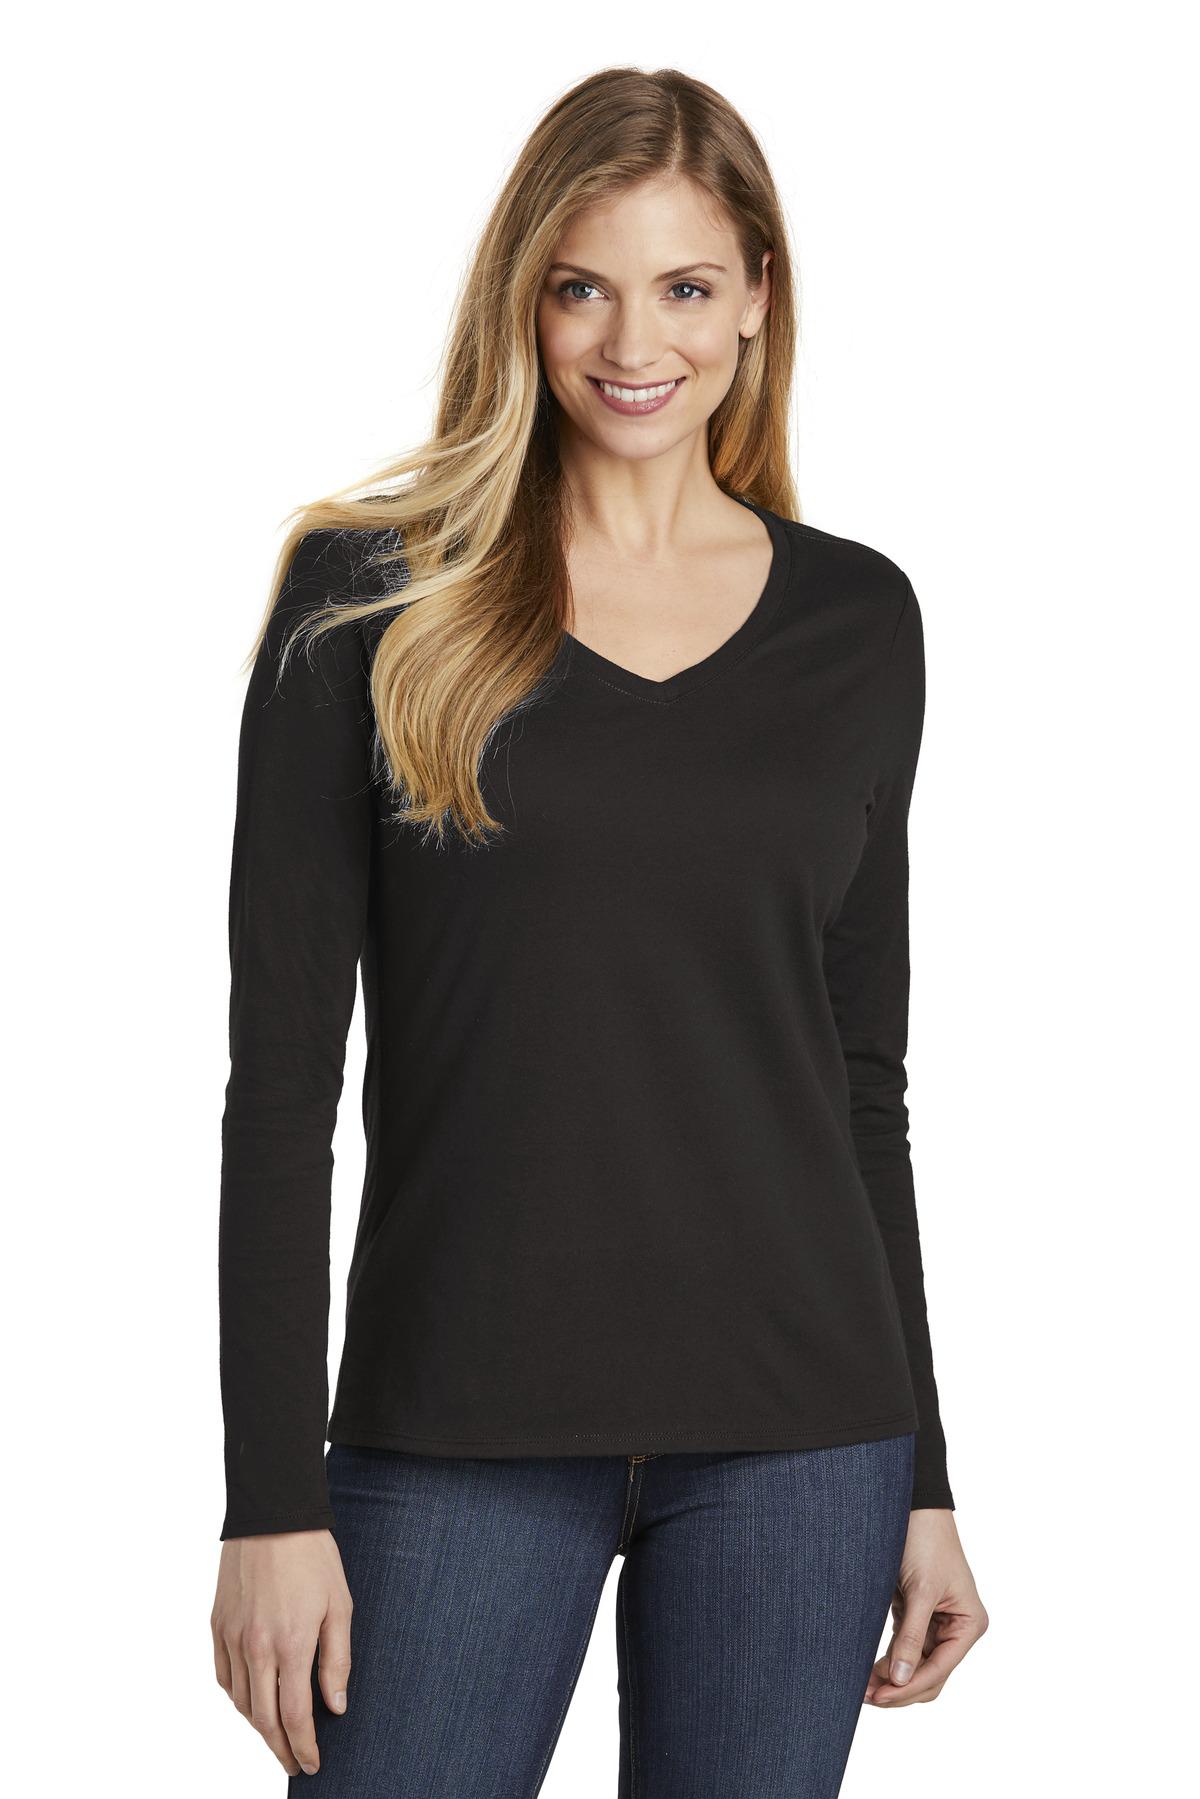 District DT6201 Women's Very Important Tee Long Sleeve V-Neck - Shirtmax